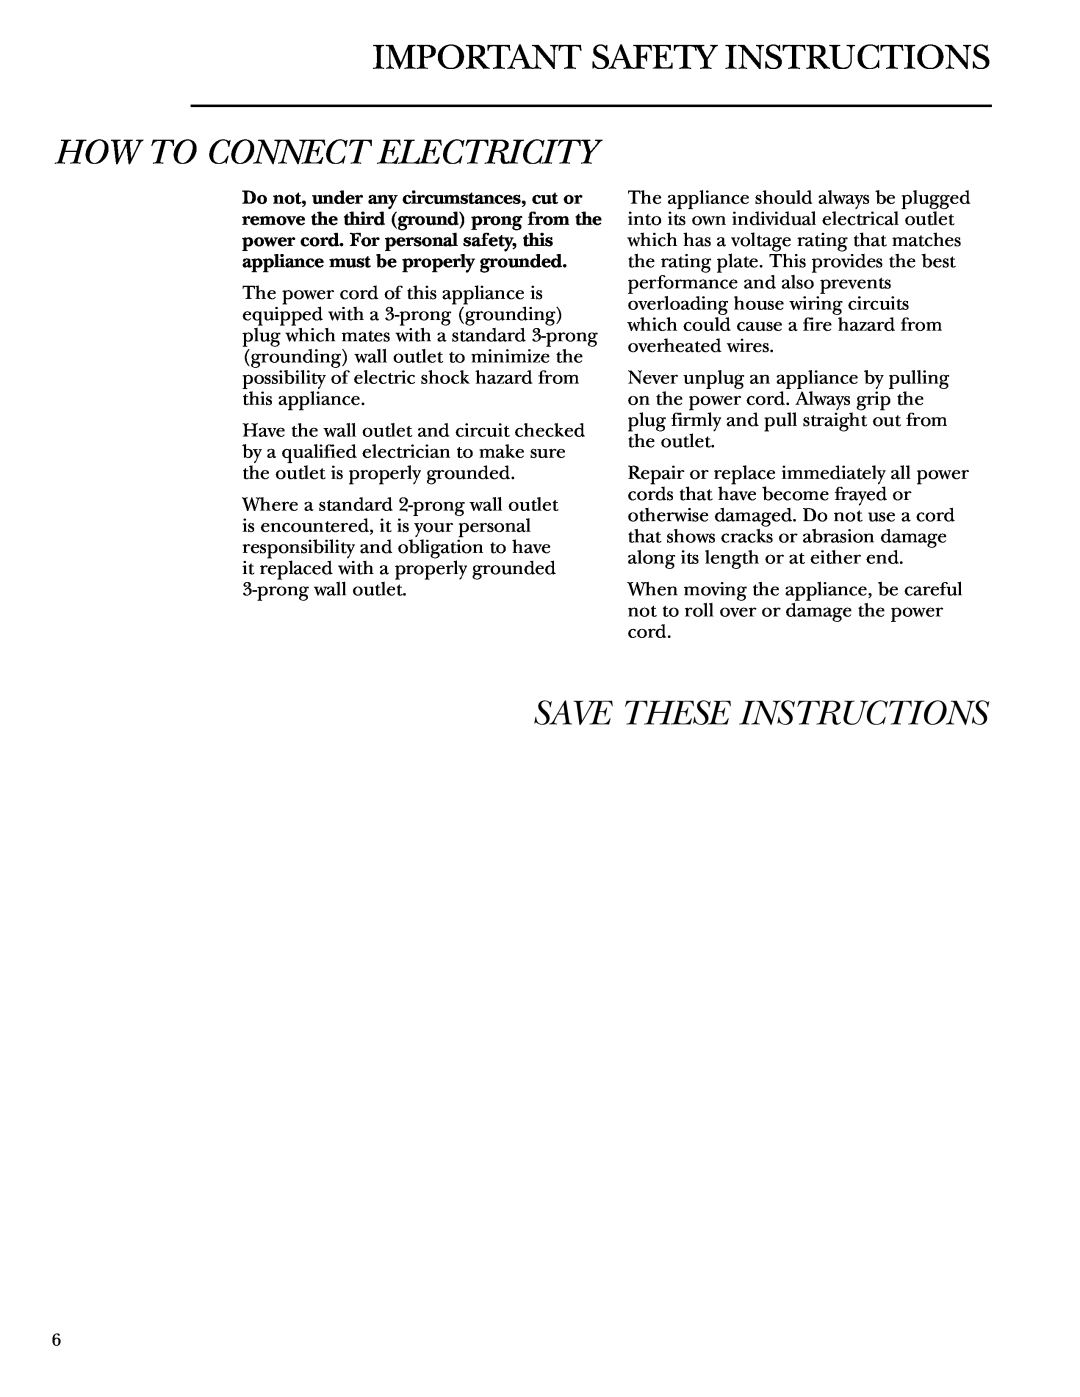 GE ZDBT240 owner manual How To Connect Electricity, Save These Instructions, Important Safety Instructions 